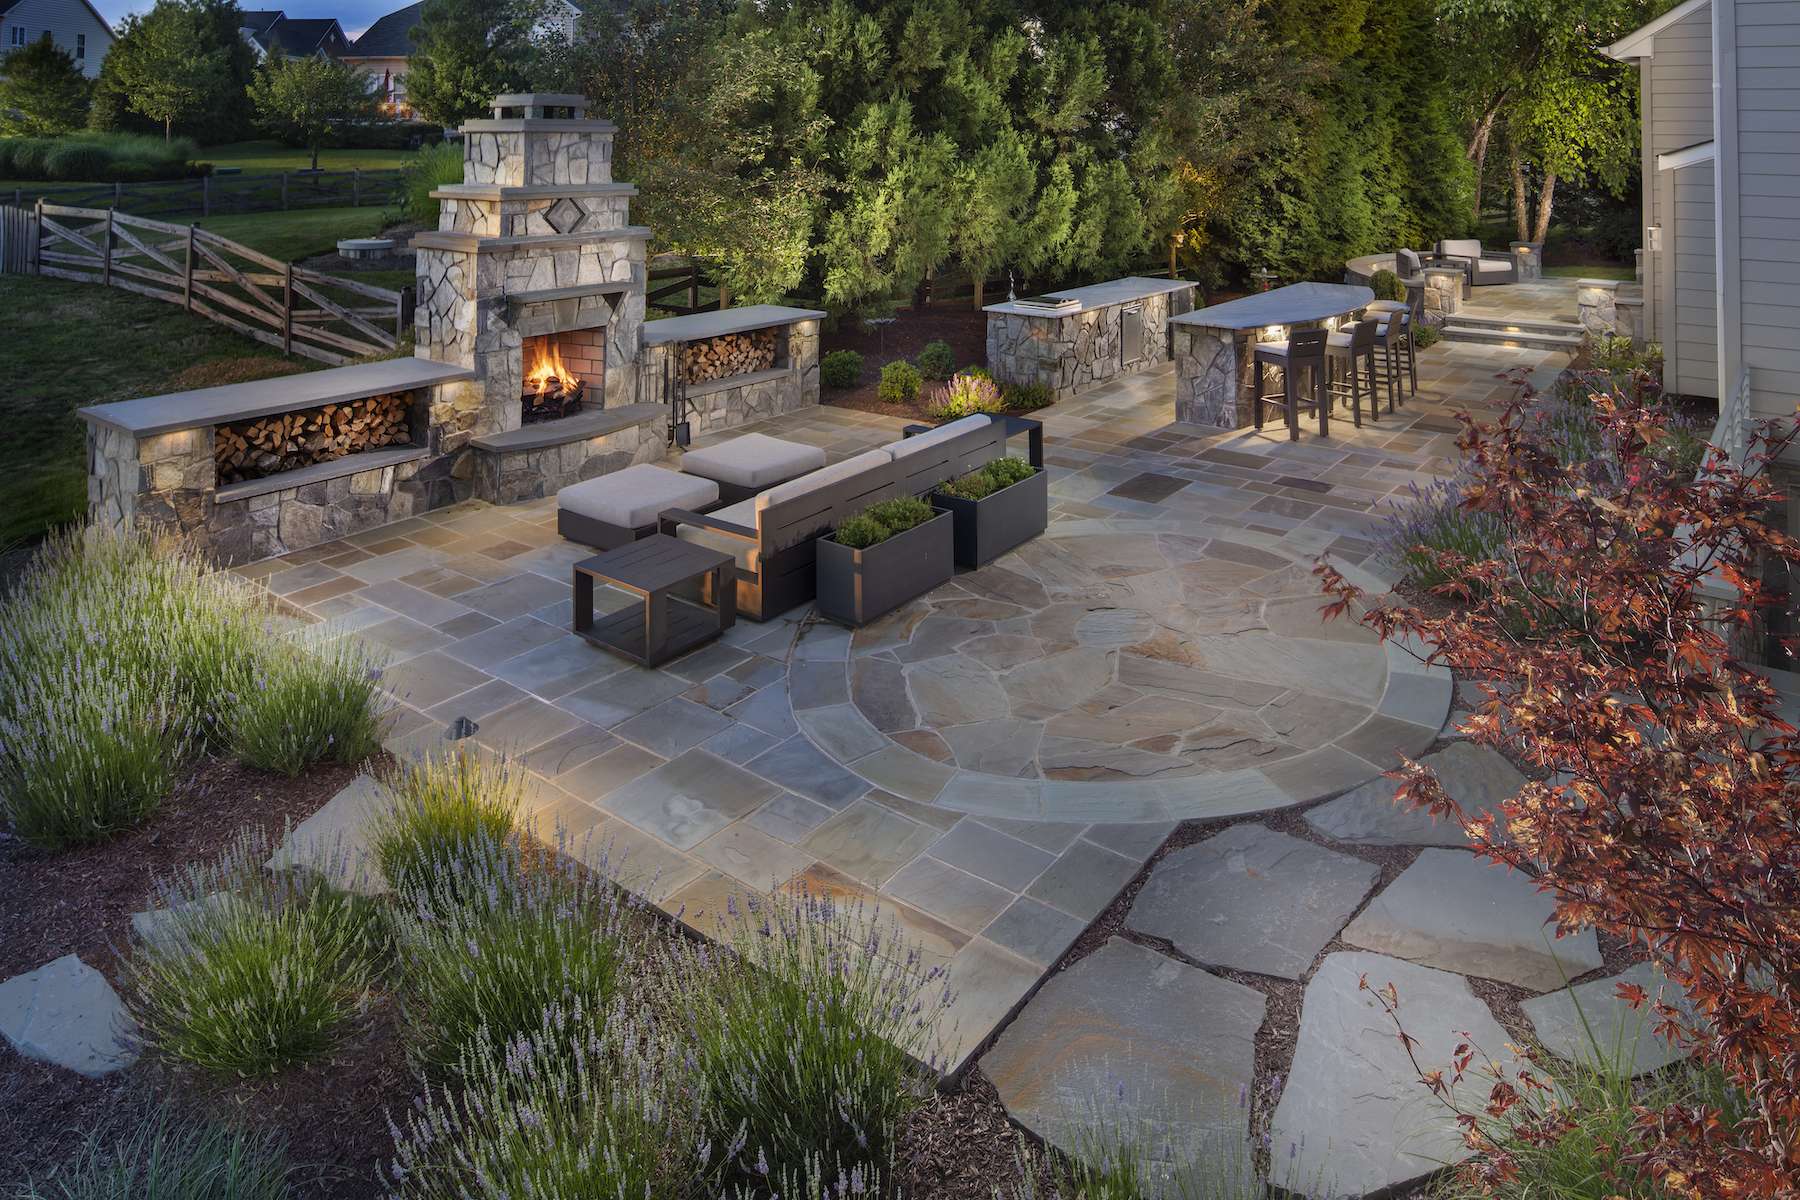 Patio design for a wedding and functionality in the future